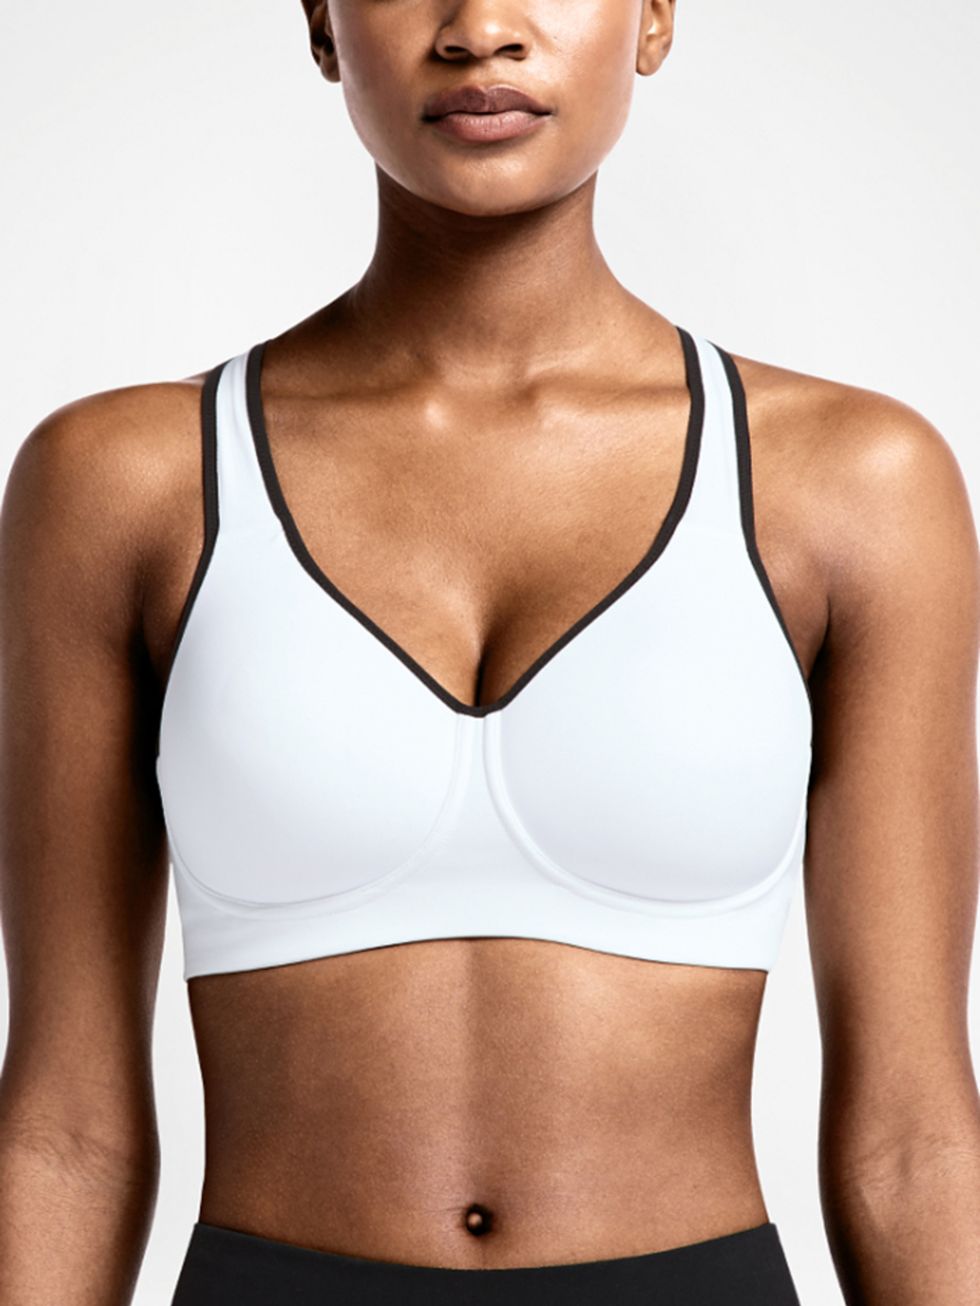 <p><strong>RACE DAY</strong></p>

<p><strong>Be supported</strong><br />
This is the number one piece of kit yes, it trumps your trainers make sure you have a sports bra that fits and supports you perfectly. The reason is two fold: one is to avoid disco